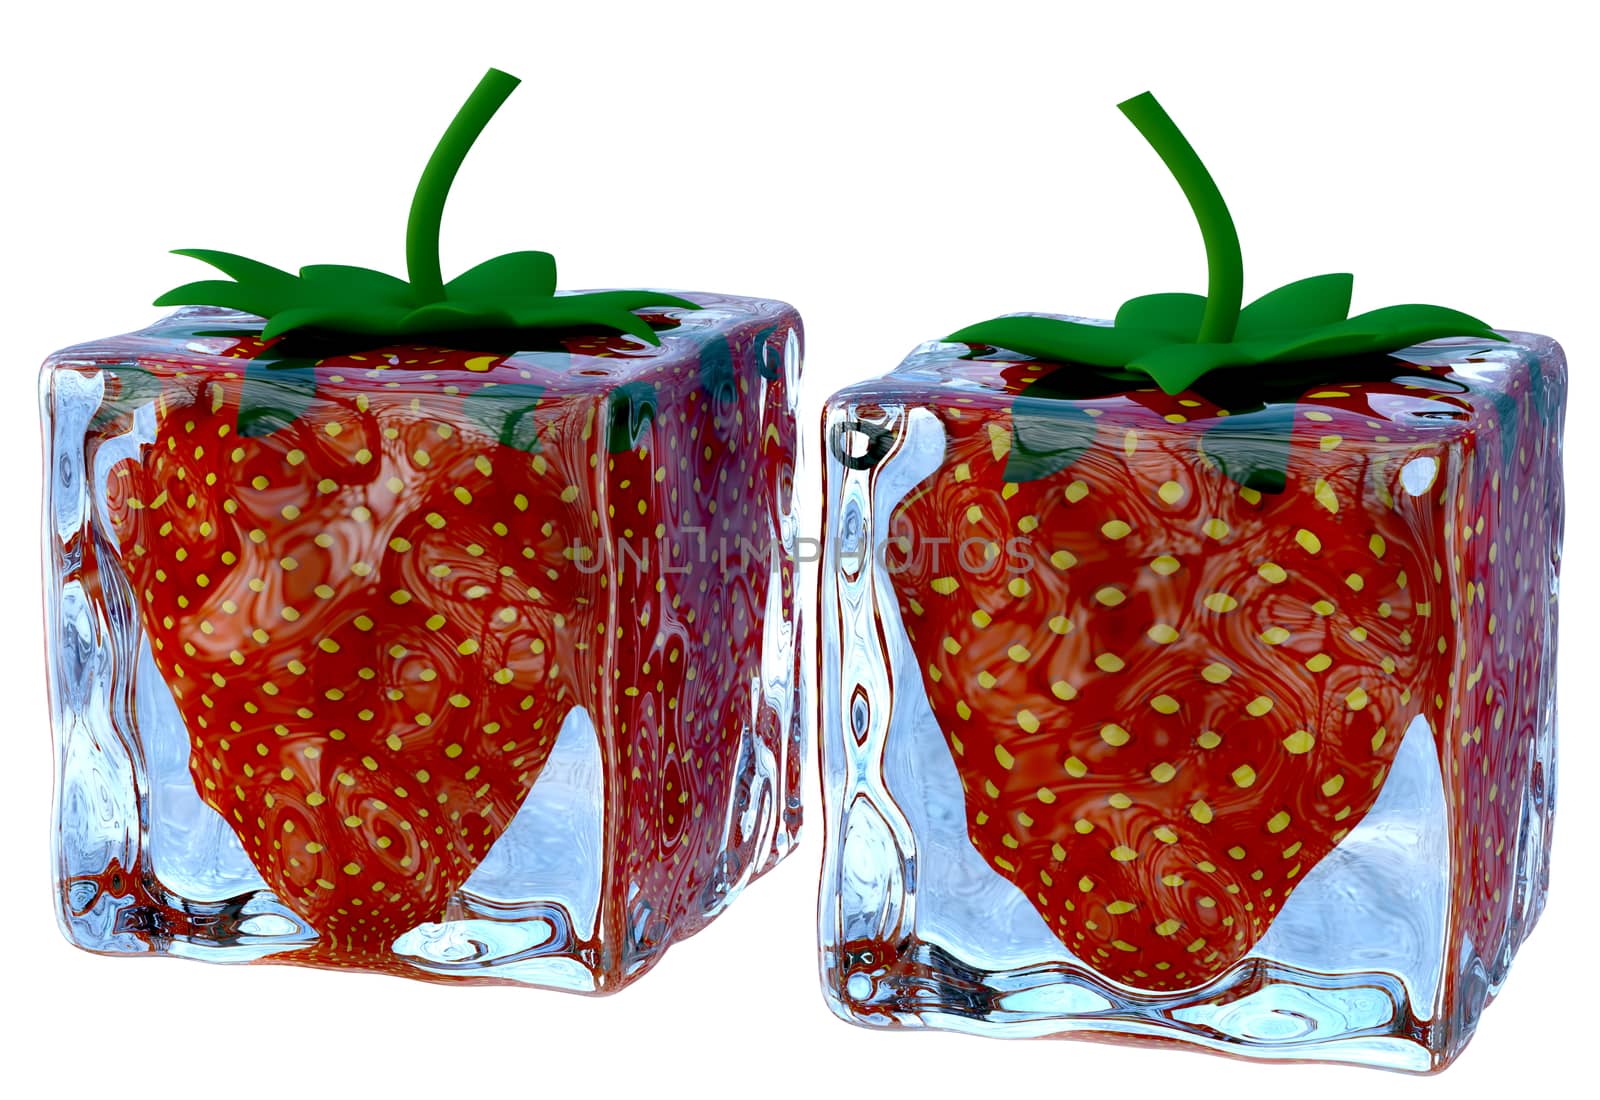 two melting ice cubes with sweet ripe strawberries by merzavka